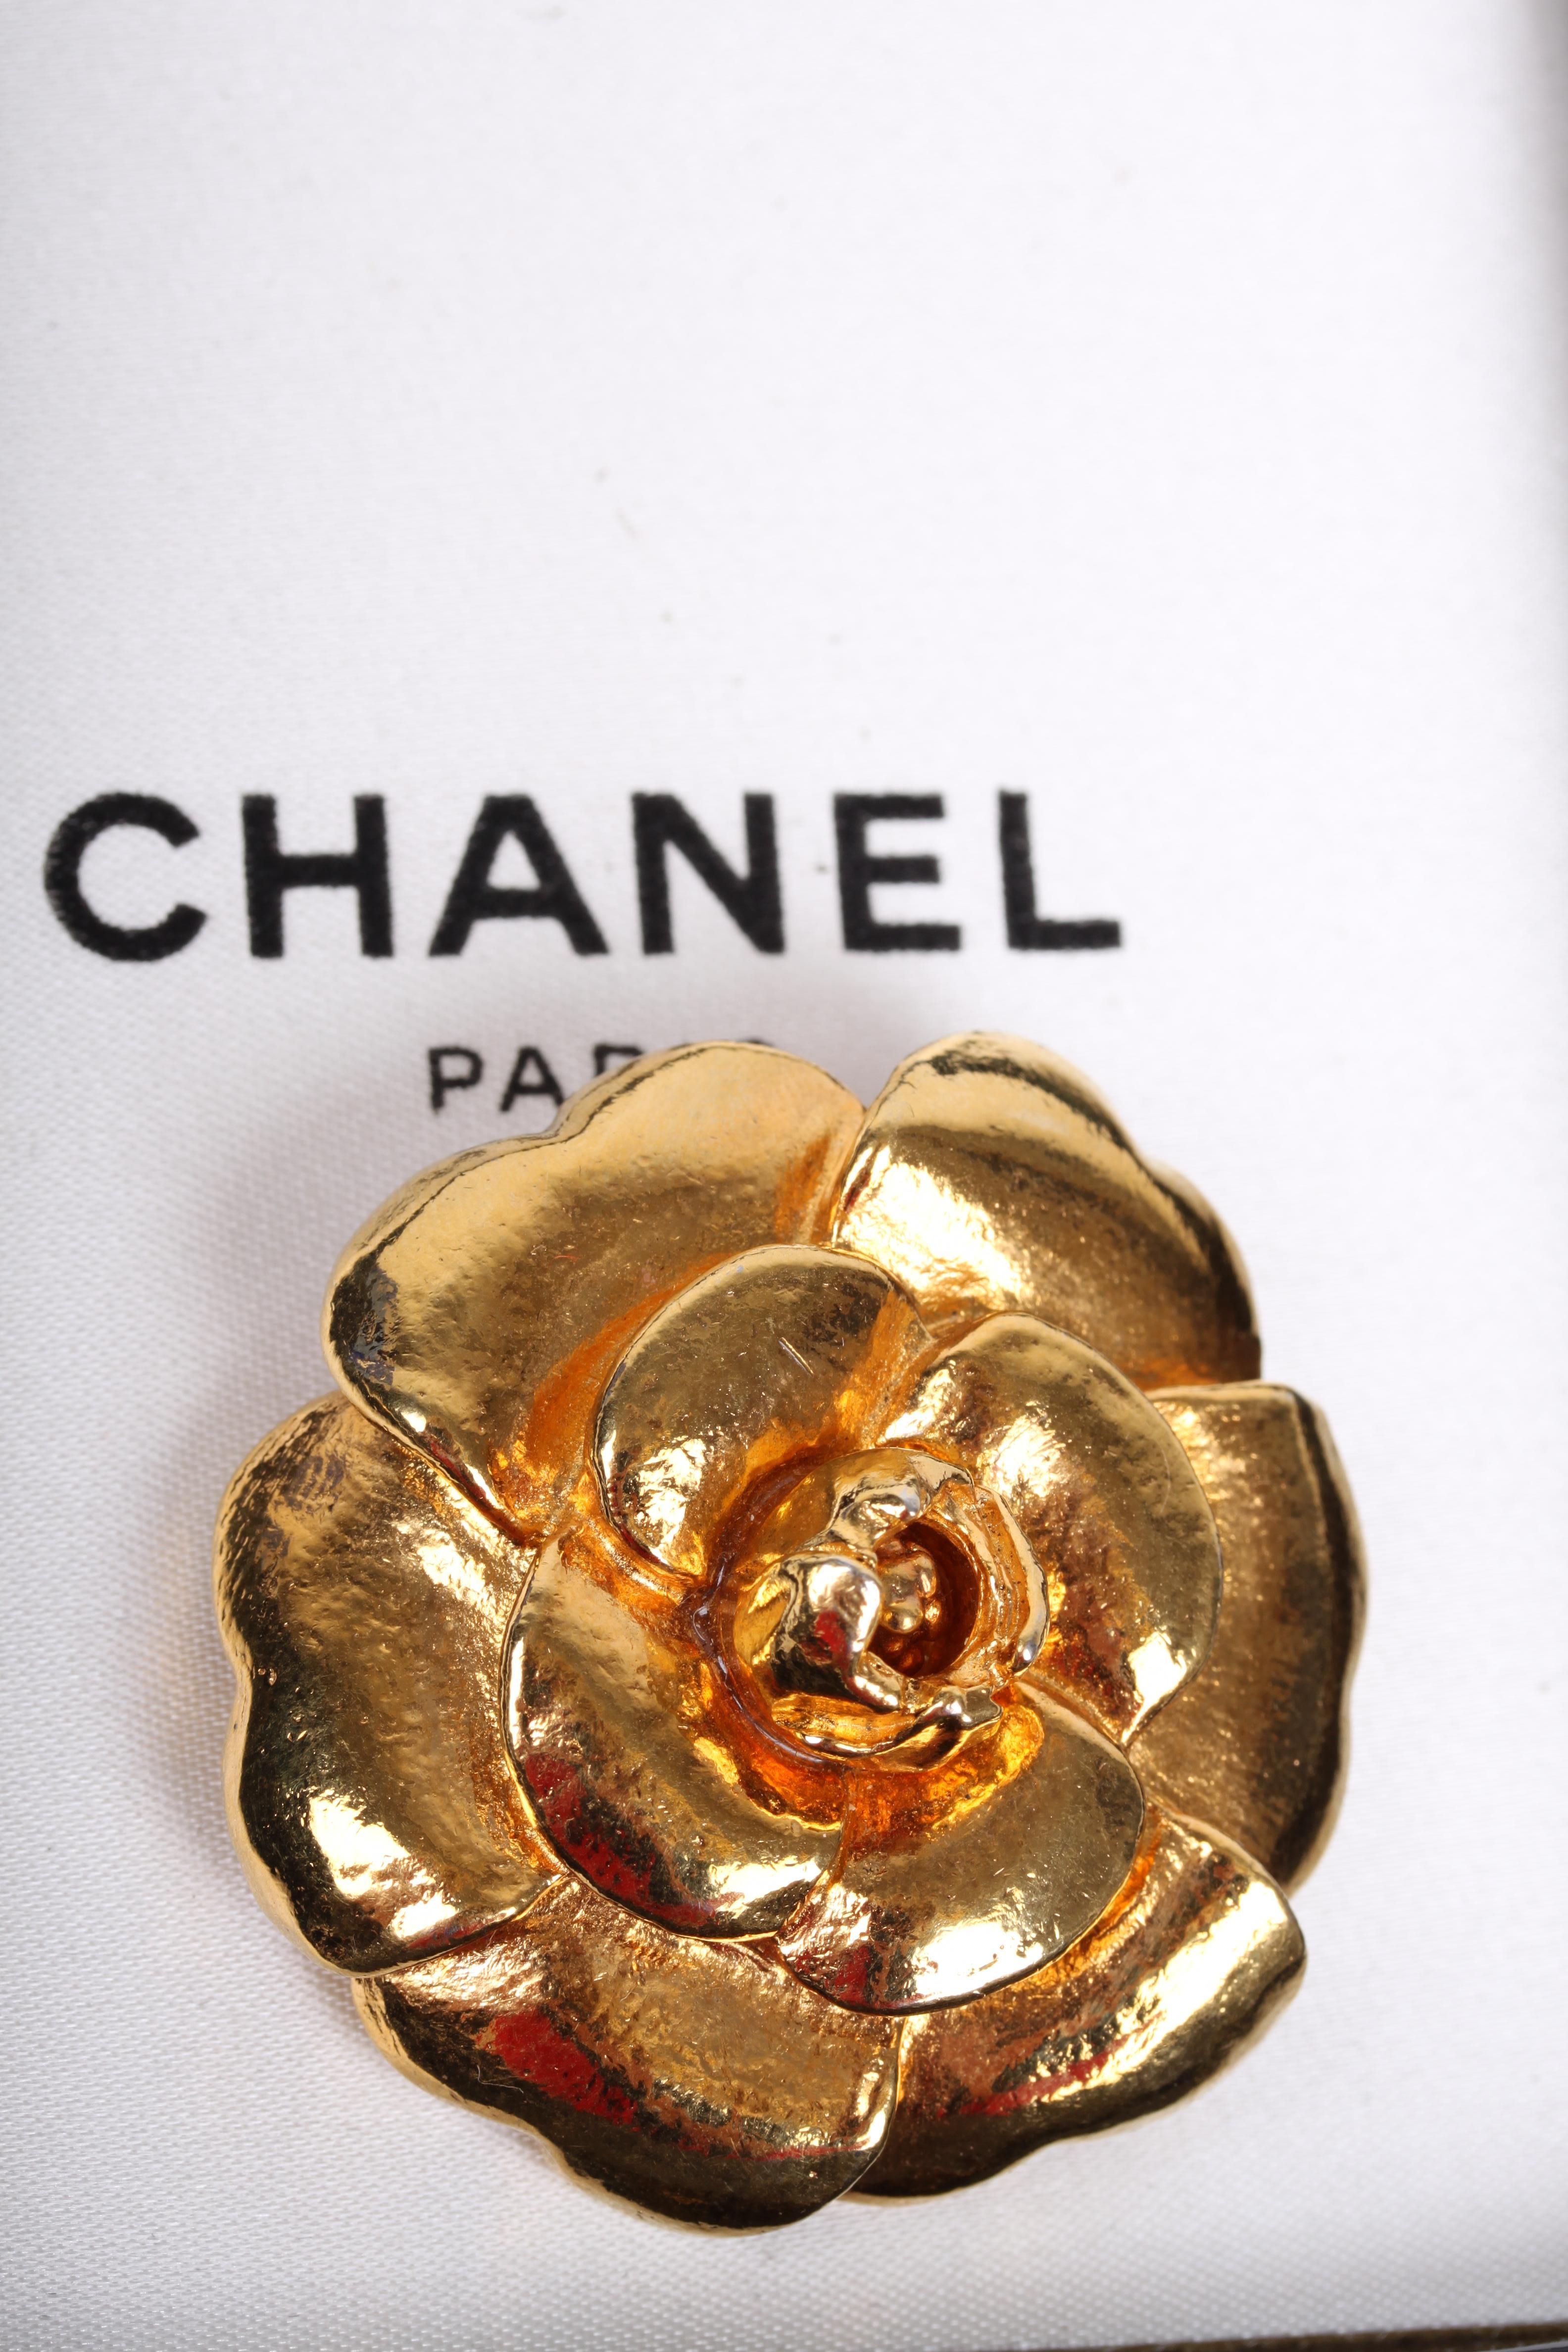 Soooo nice! Three piece vintage jewelry set by Chanel; a brooch and a pair of earrings.

All in the shape of the welknown camellia flower, gold-tone. The earrings have a clip-on system on the back, so you don't have to have pearced ears. The brooch